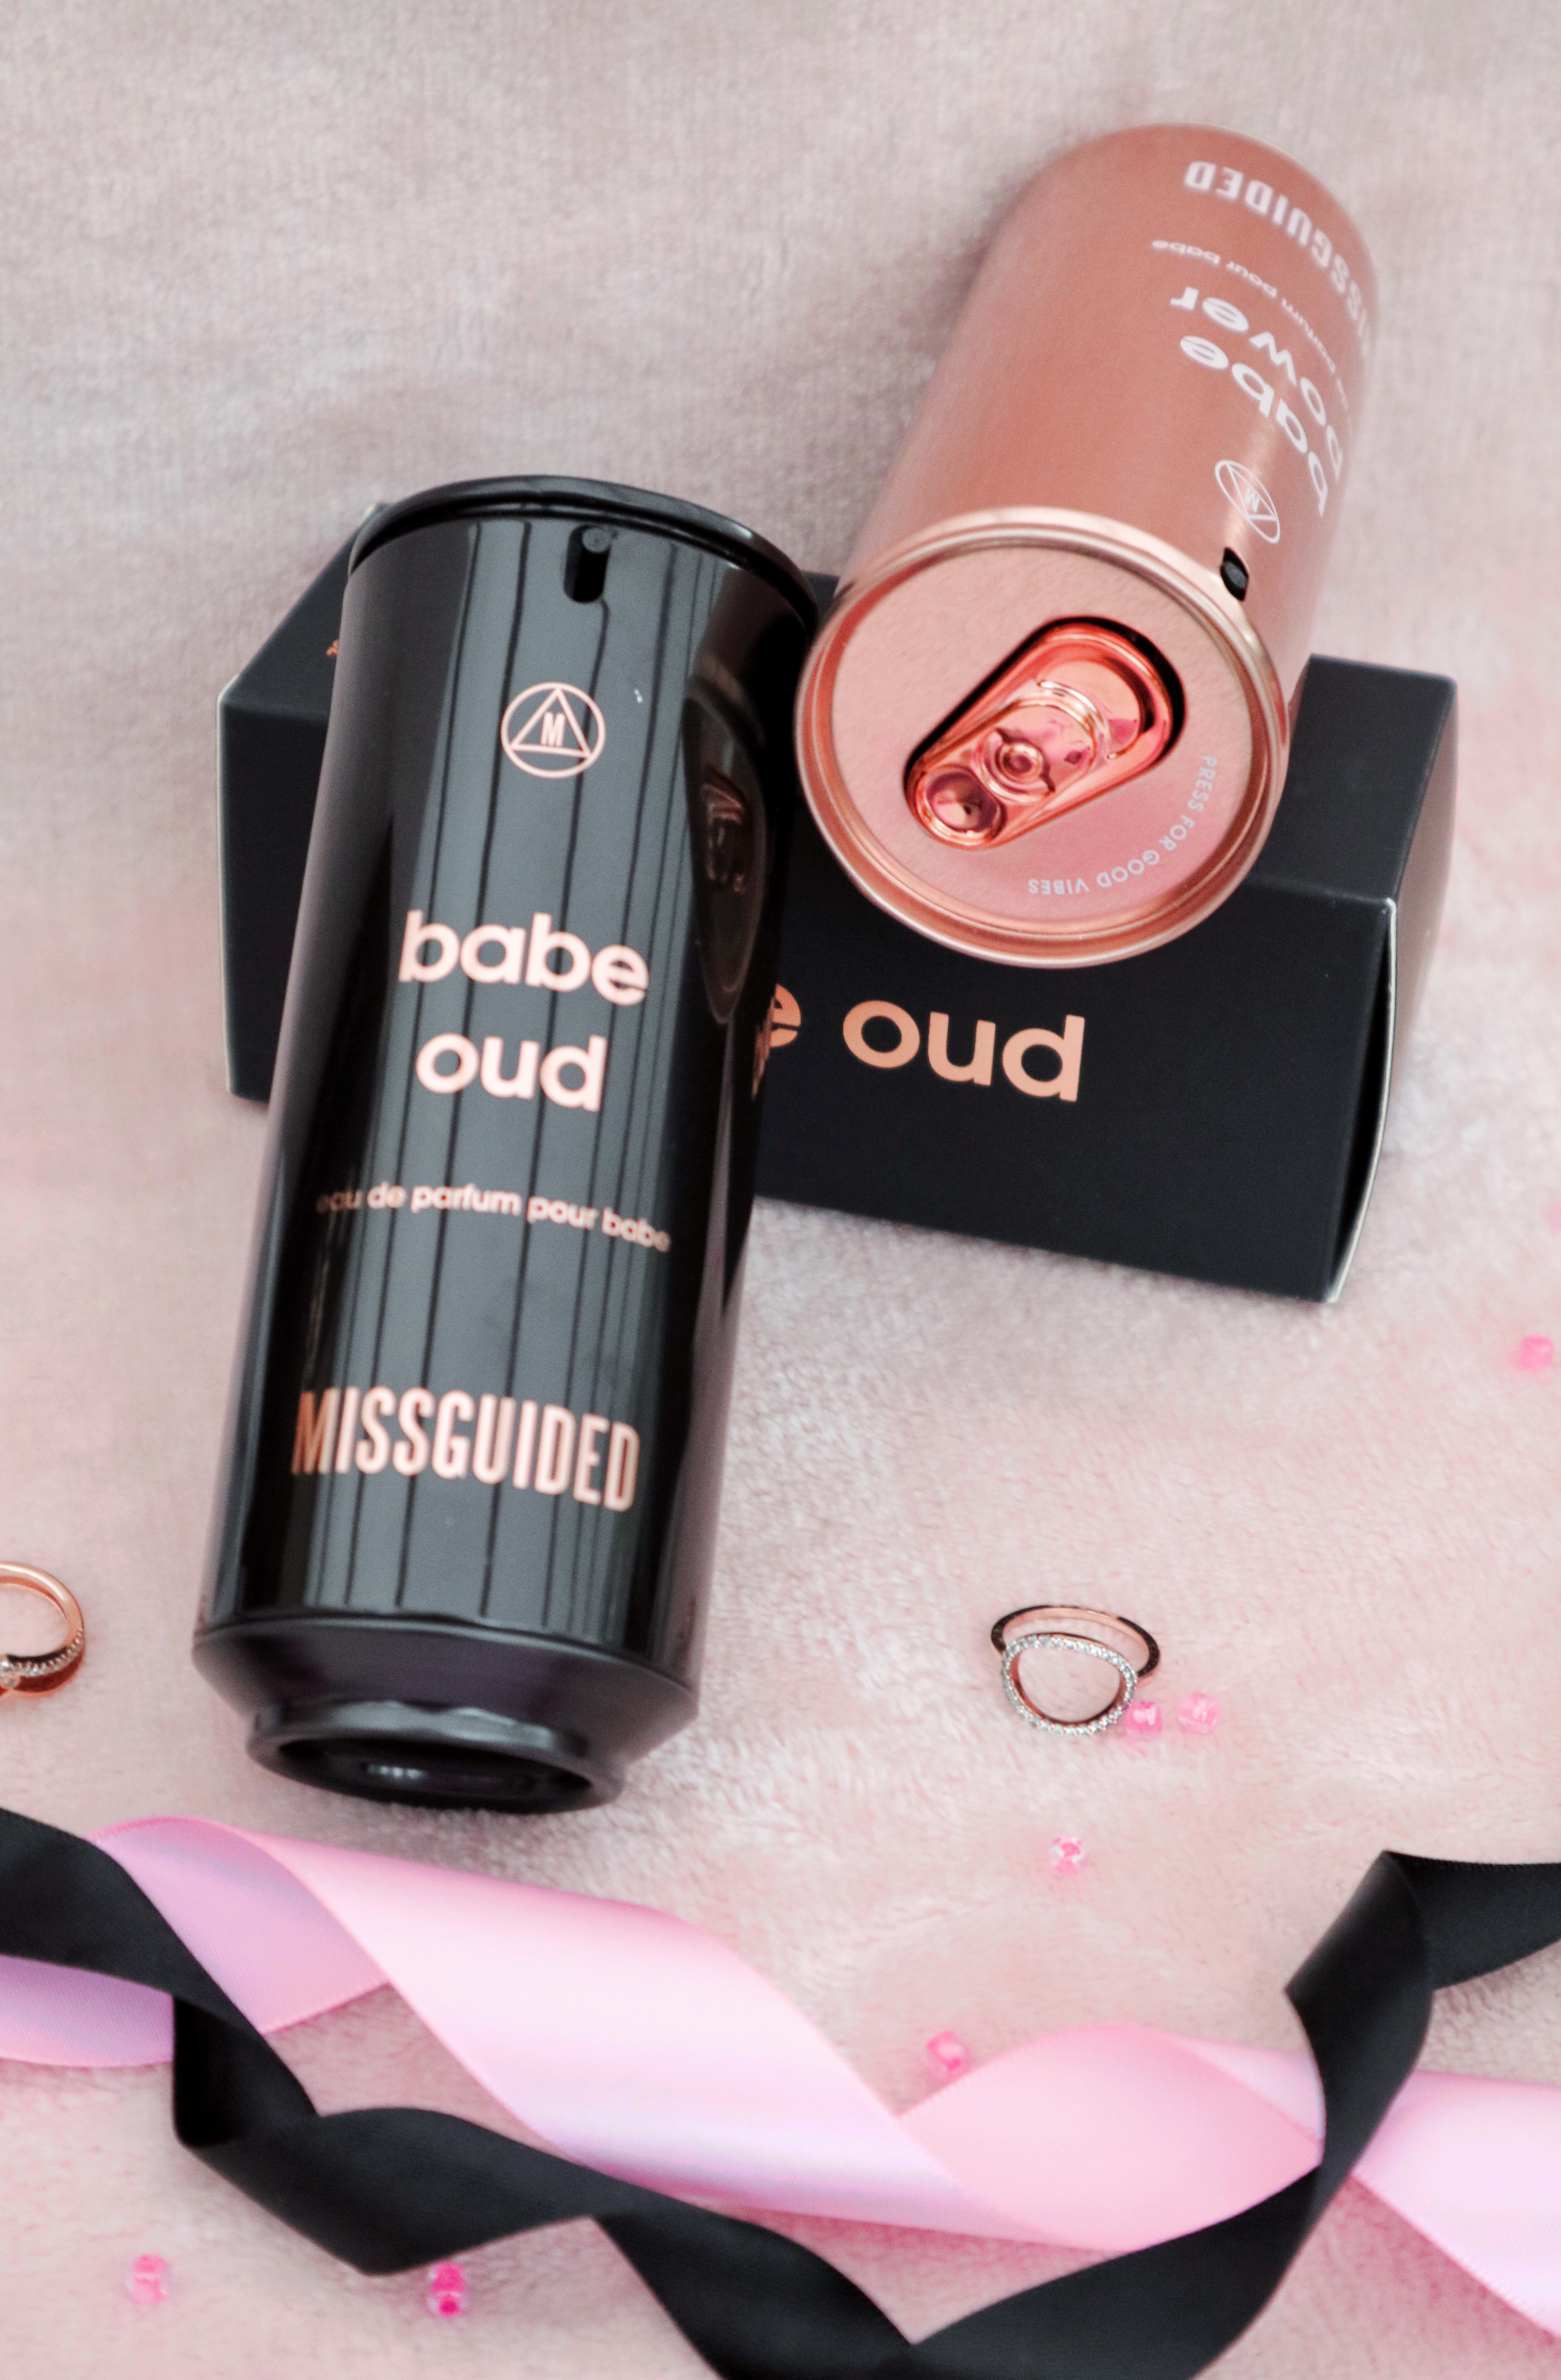 Missguided fragrance.